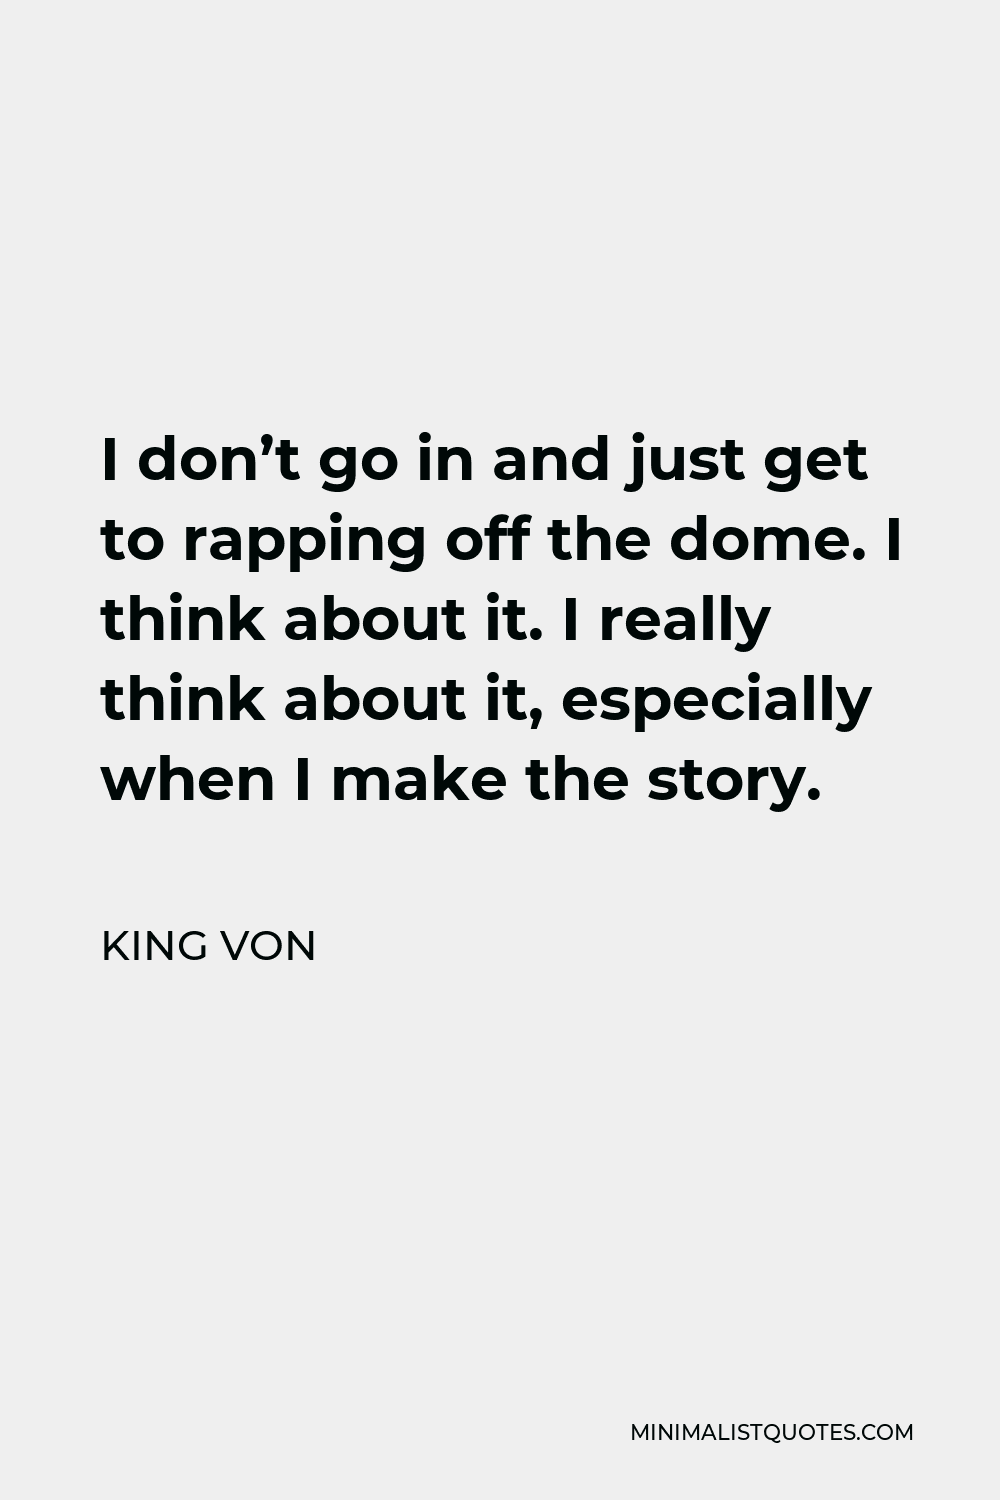 King Von Quote - I don’t go in and just get to rapping off the dome. I think about it. I really think about it, especially when I make the story.